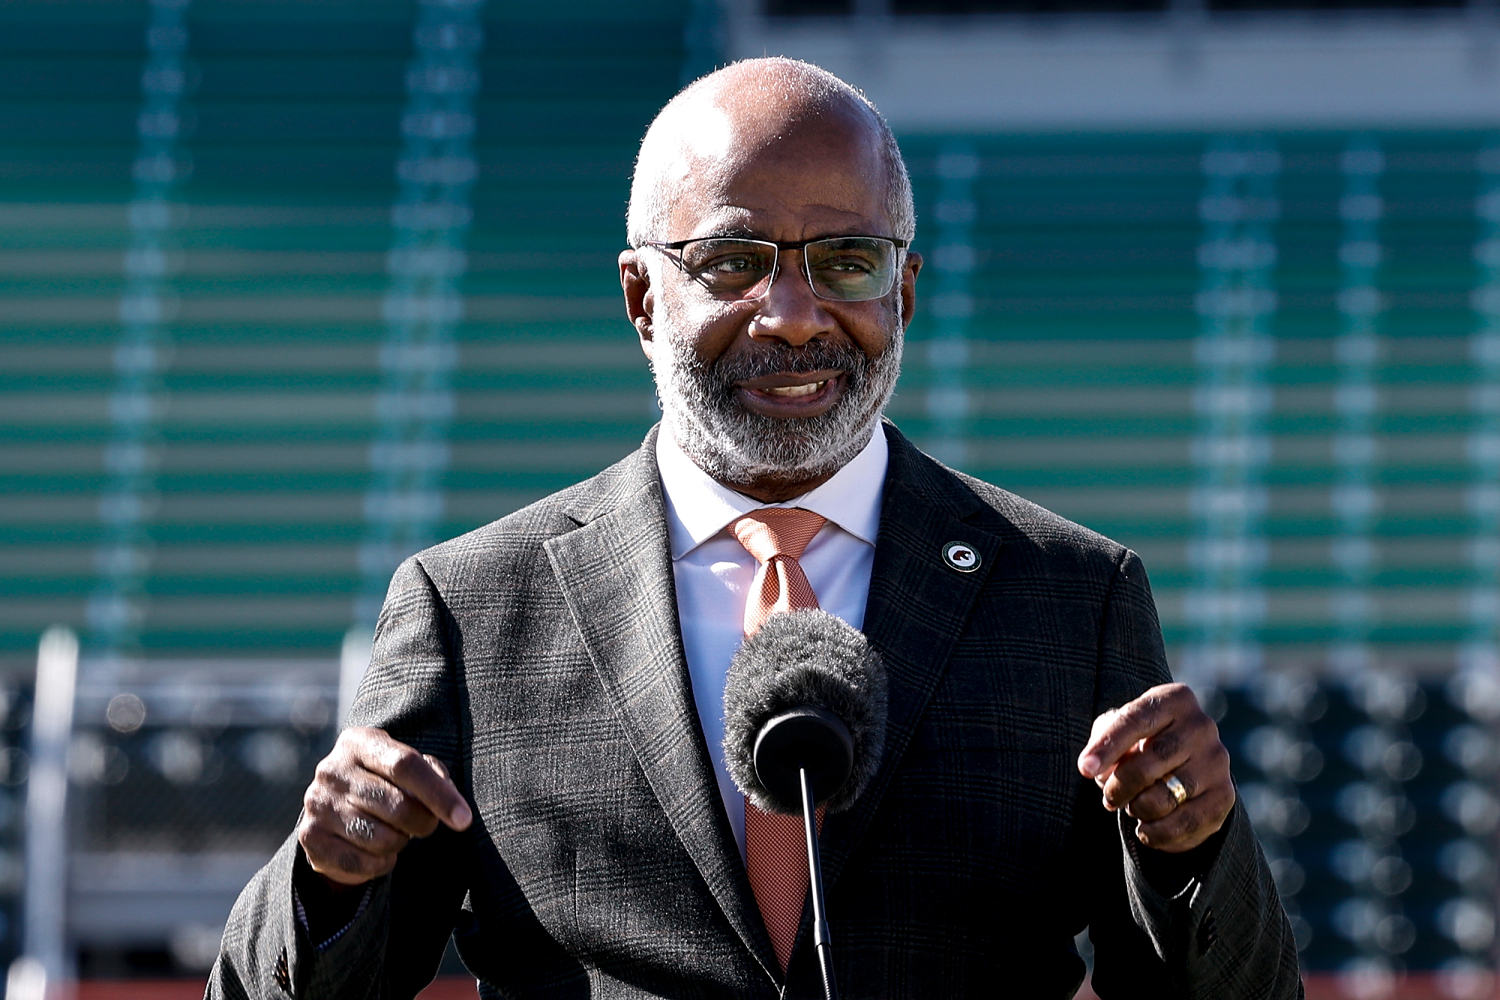 The president of Florida’s only public historically Black university resigns after donation debacle 